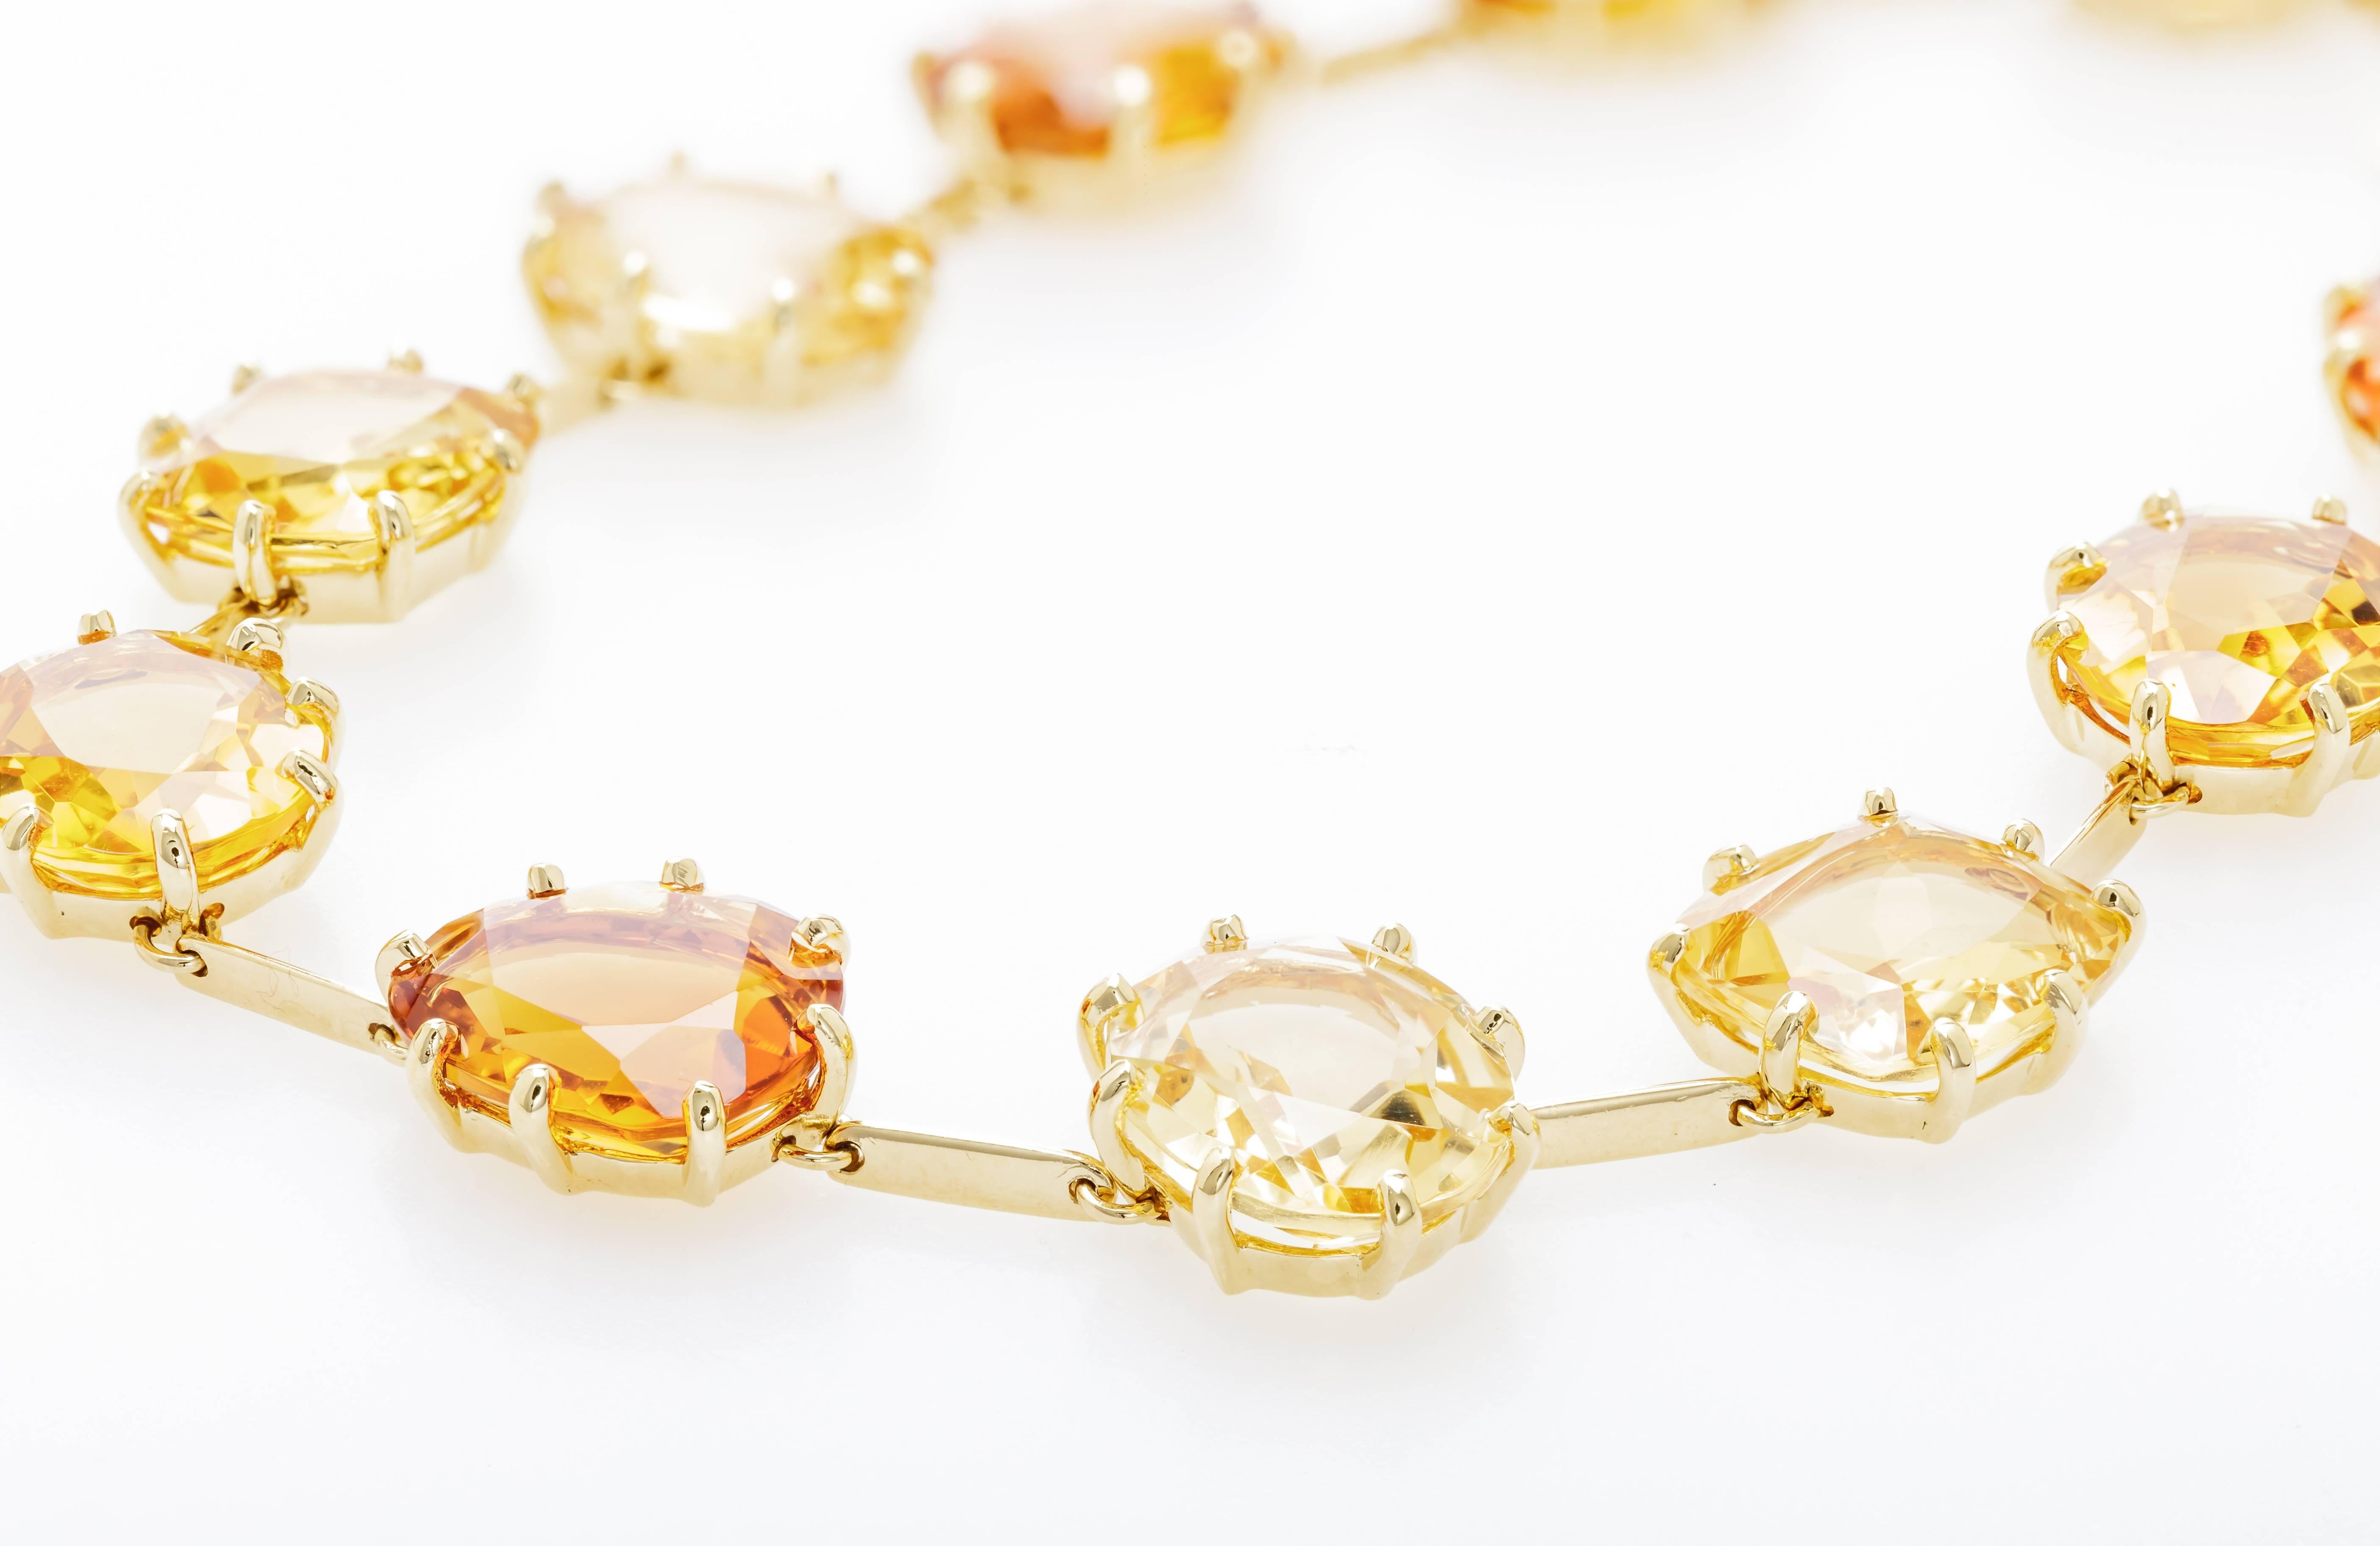 This new H. Stern Sunrise bracelet features 12 citrine totaling 29.27ct in various shades set in 18k yellow gold.  There is one 0.06ct sapphire and one 0.08ct diamond.  The bracelet measures 7.5